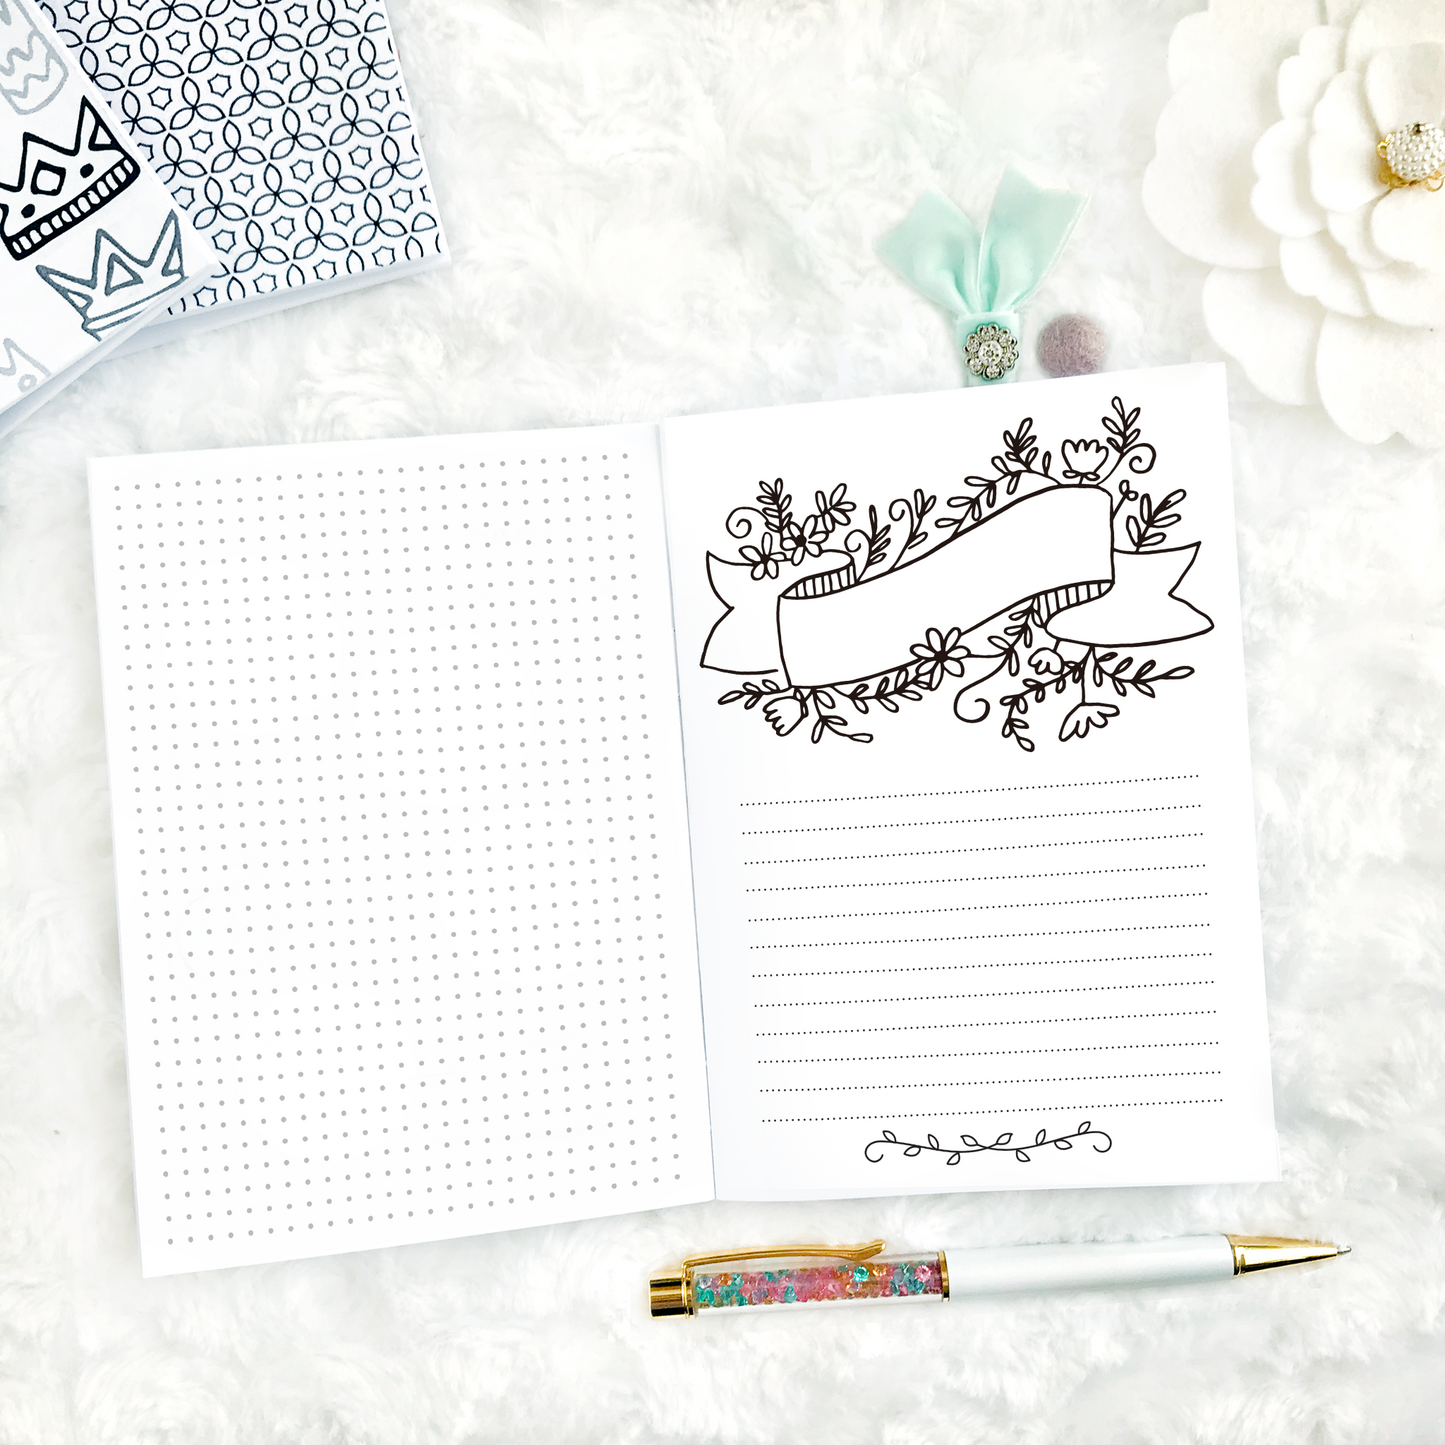 Conference Planner | Printable